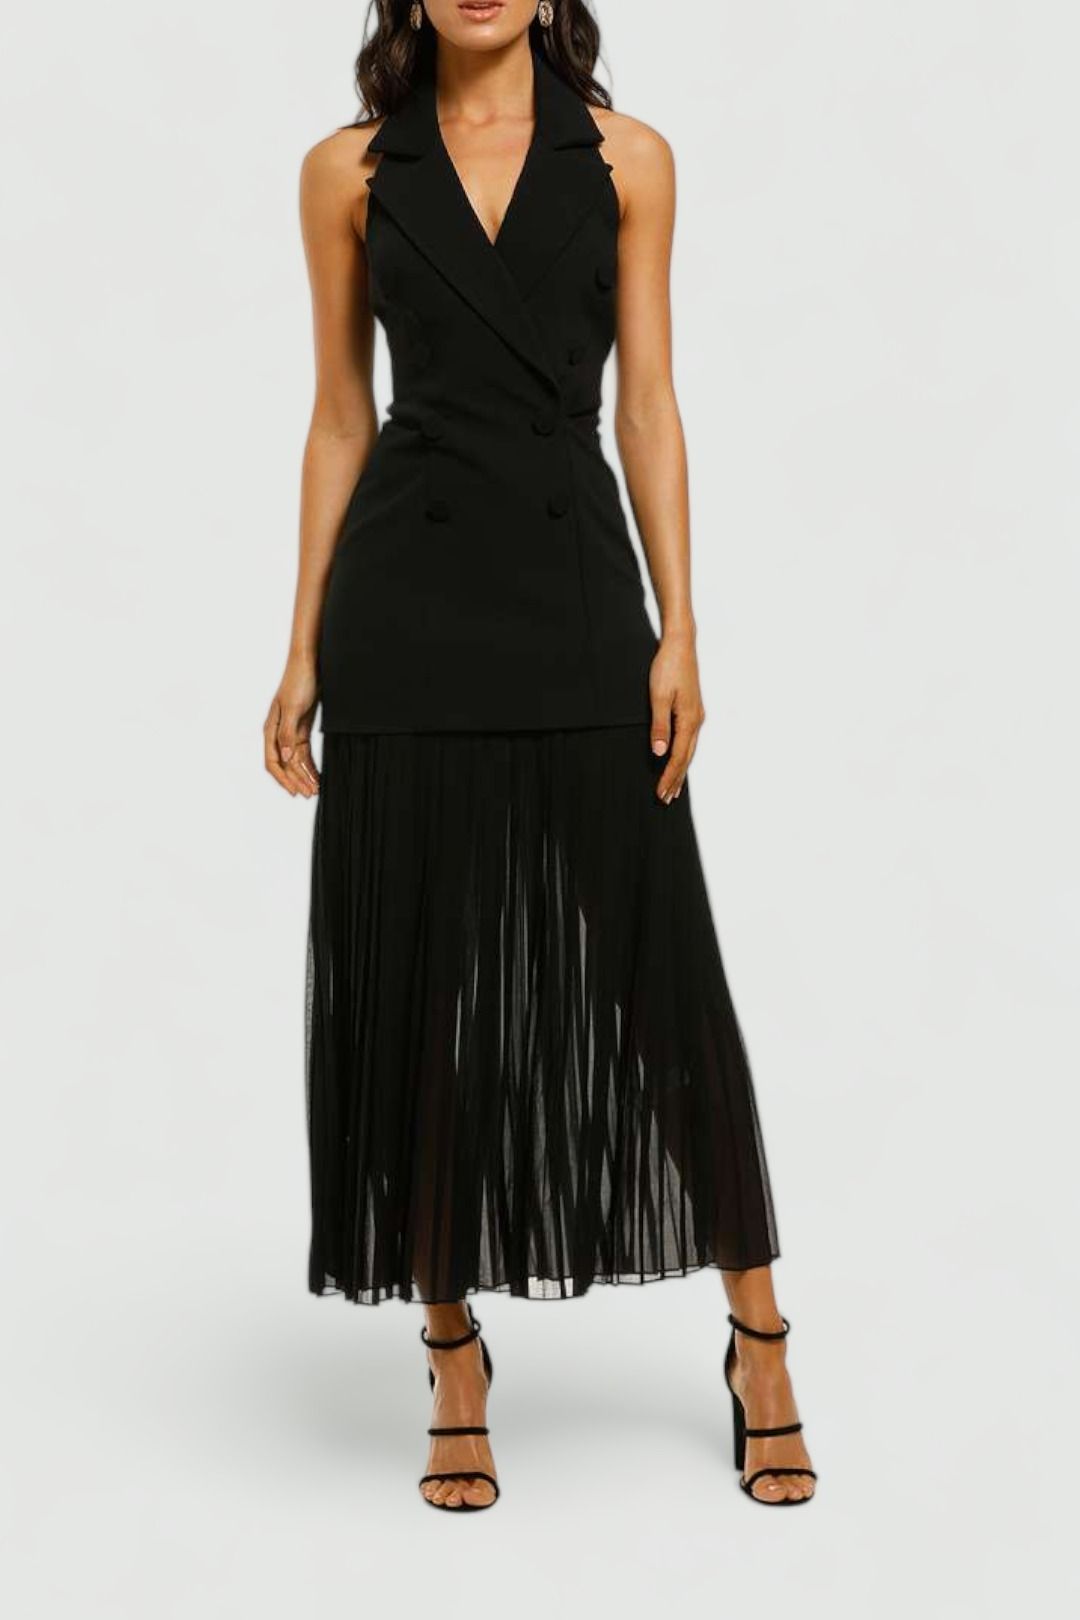 Sammiah Dress in Black by Misha Collection for Hire | Glamcorner